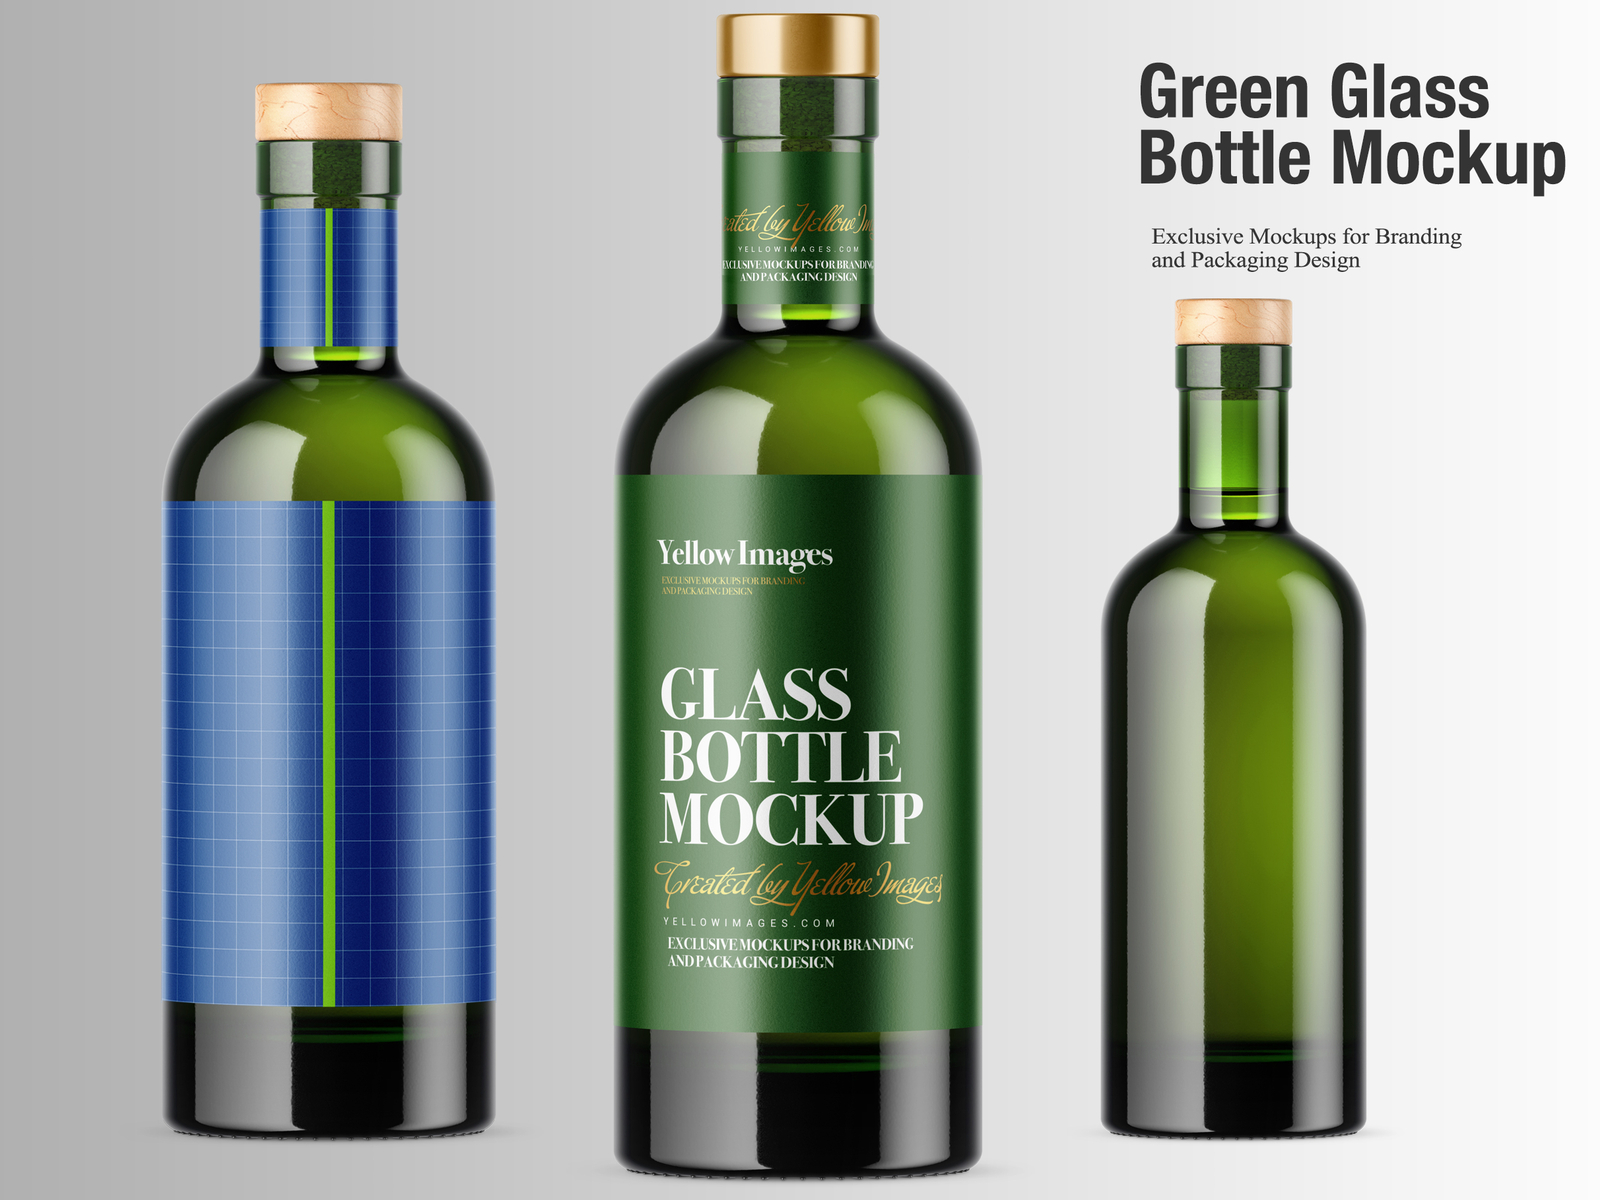 Download Wine Bottle Mockup Scene Download Free And Premium Quality Psd Mockup Templates PSD Mockup Templates